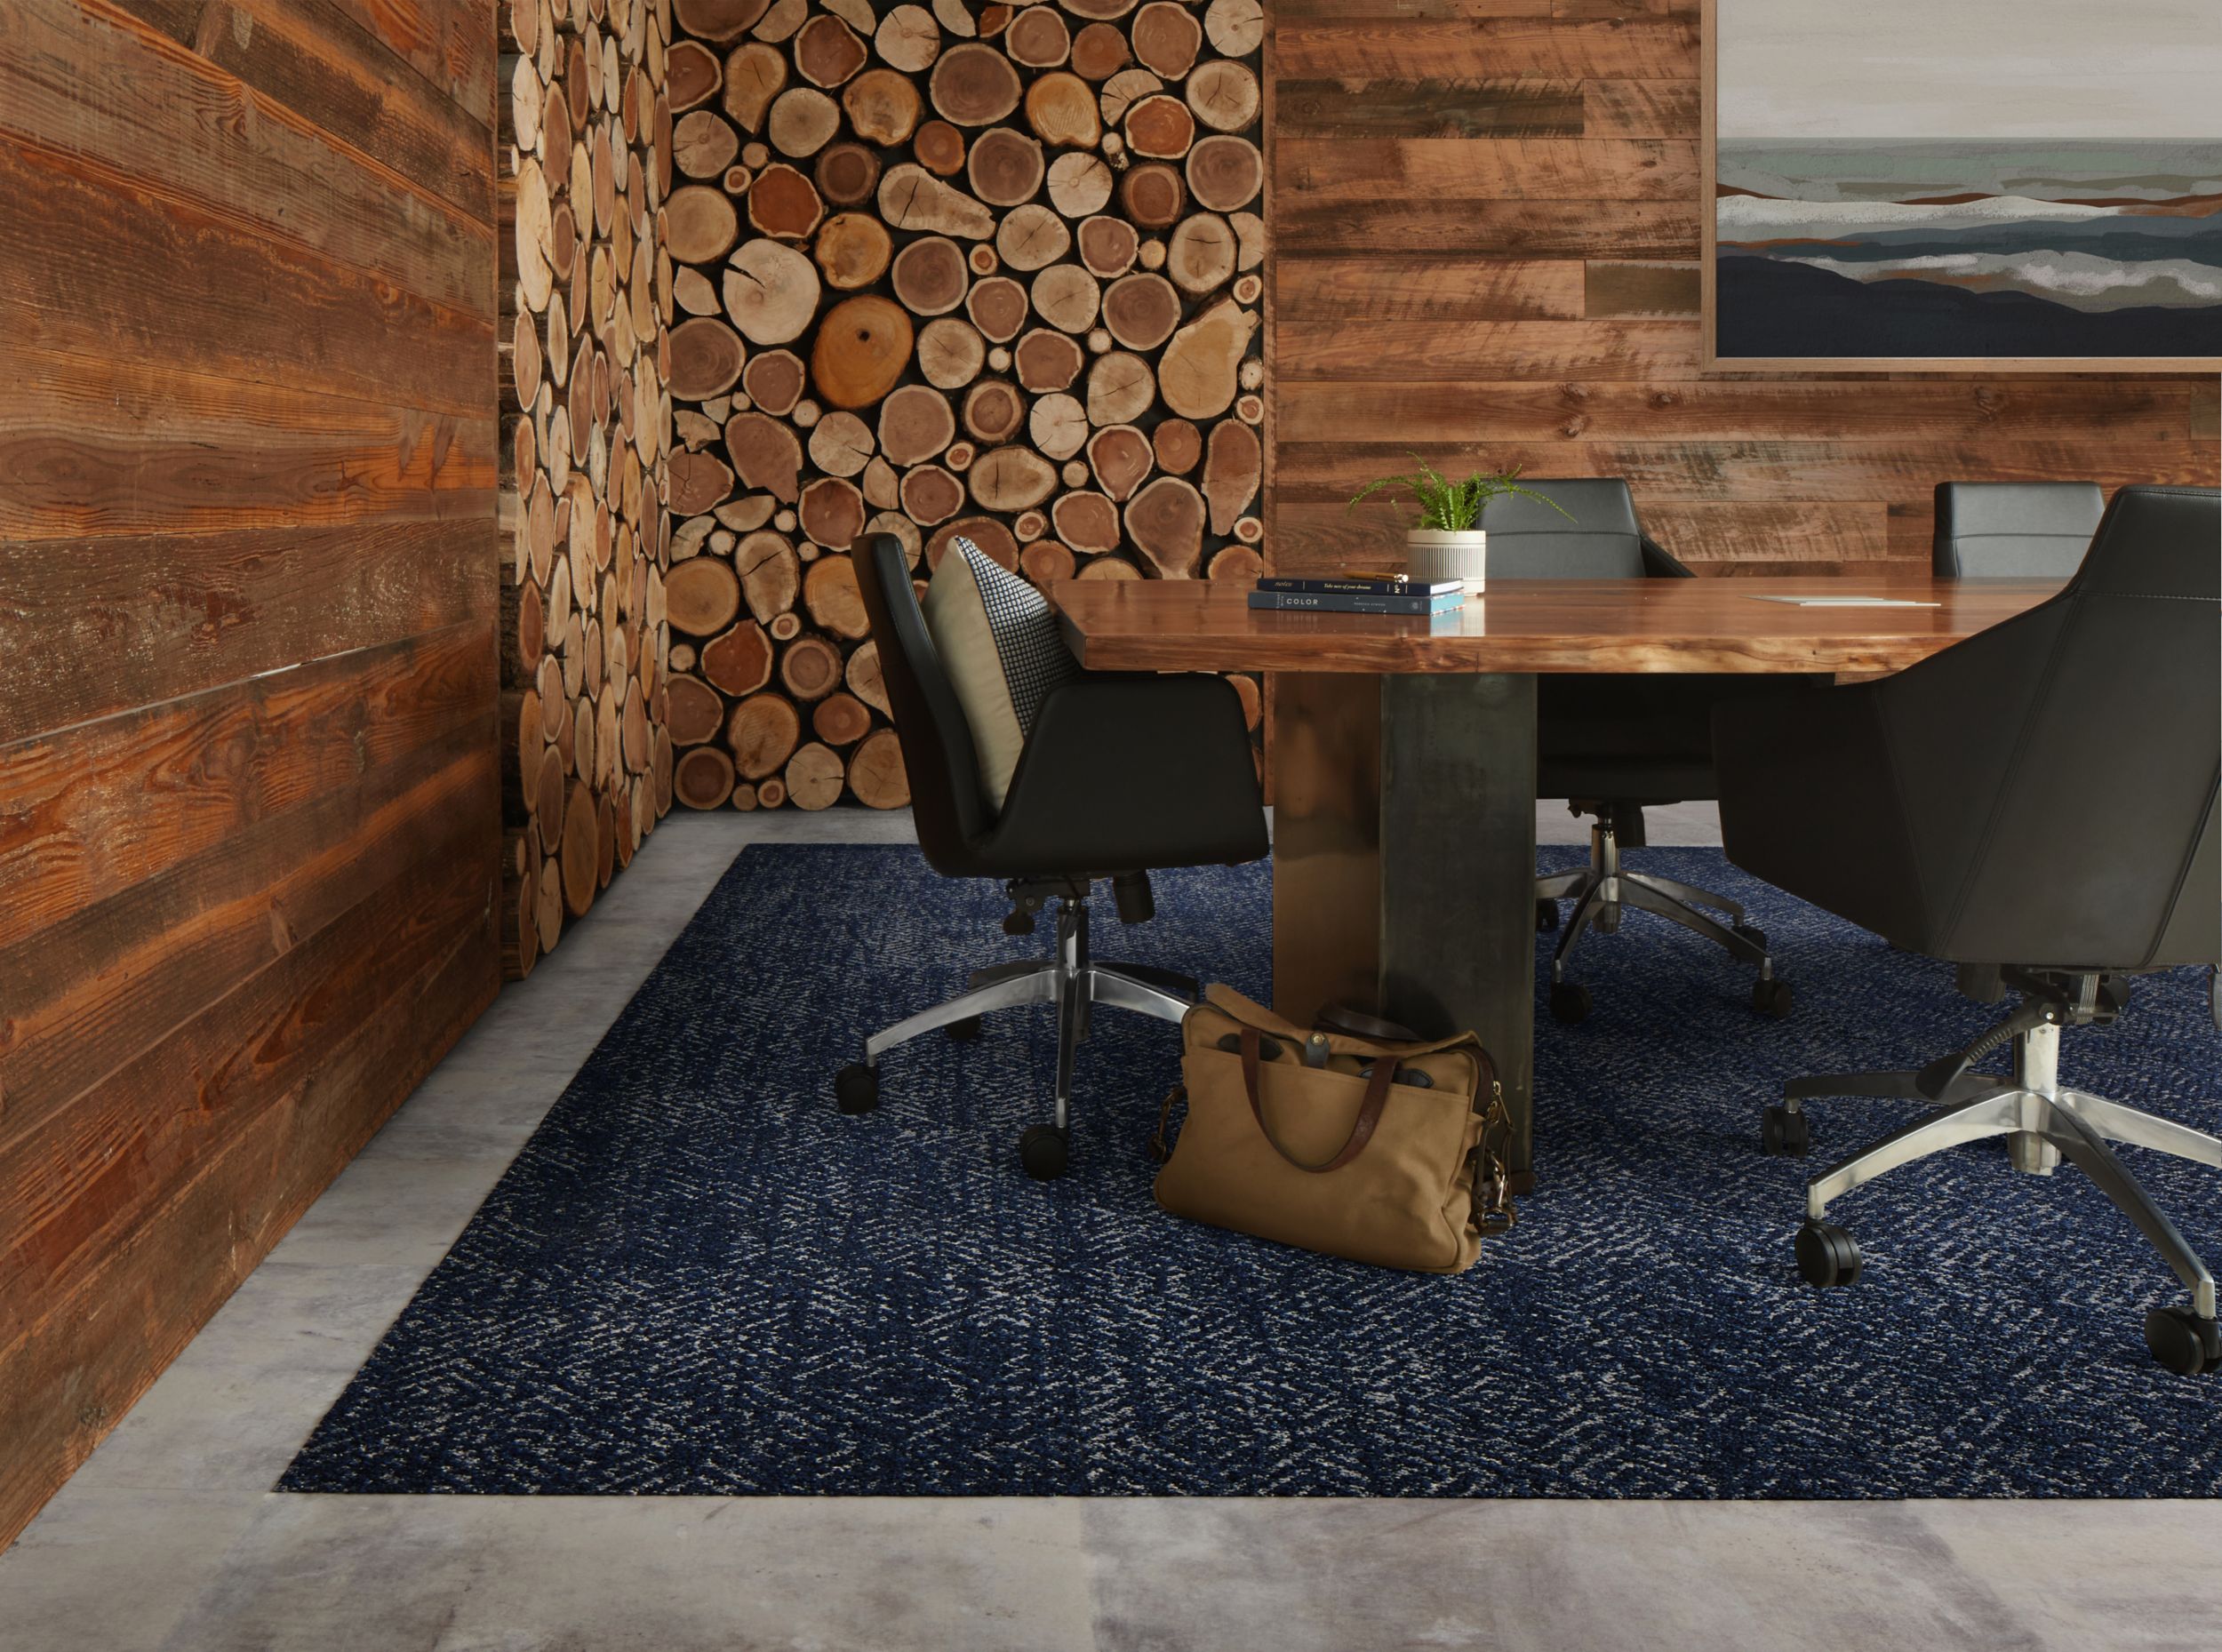 Interface Third Space 309 carpet tile with Textured Stones LVT in meeting room with wood walls and accents image number 3